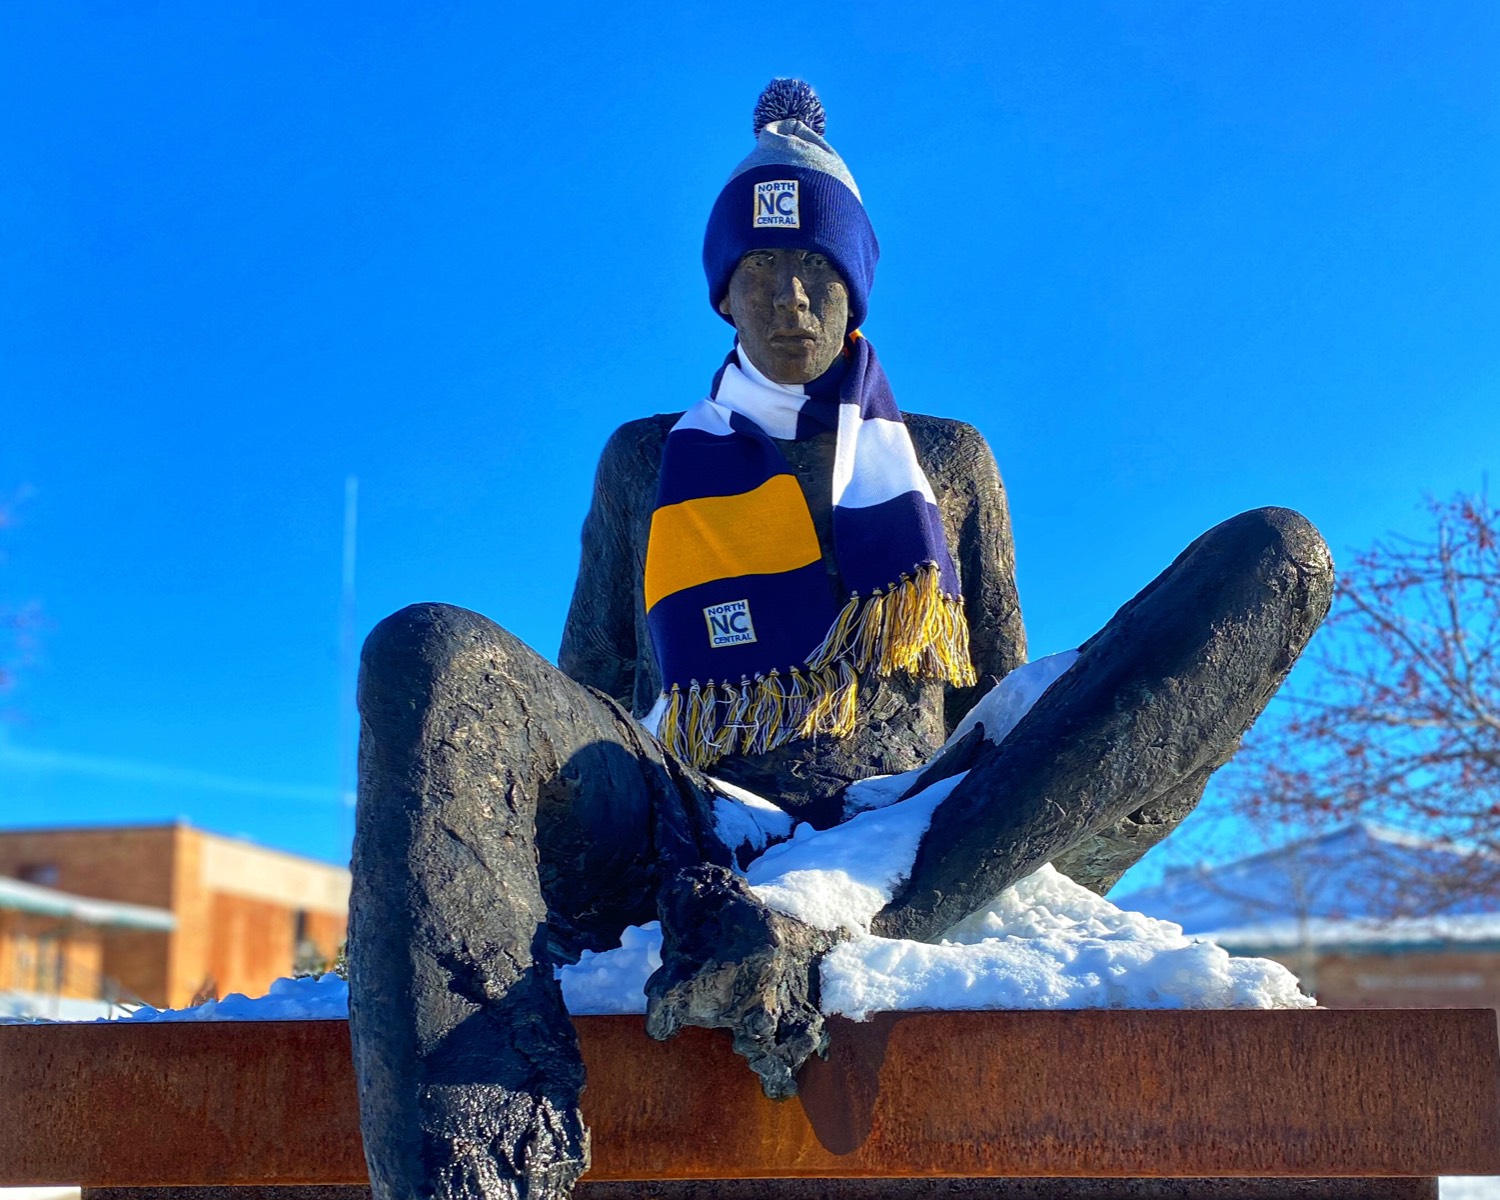 Statue on campus wearing hat and scarf.